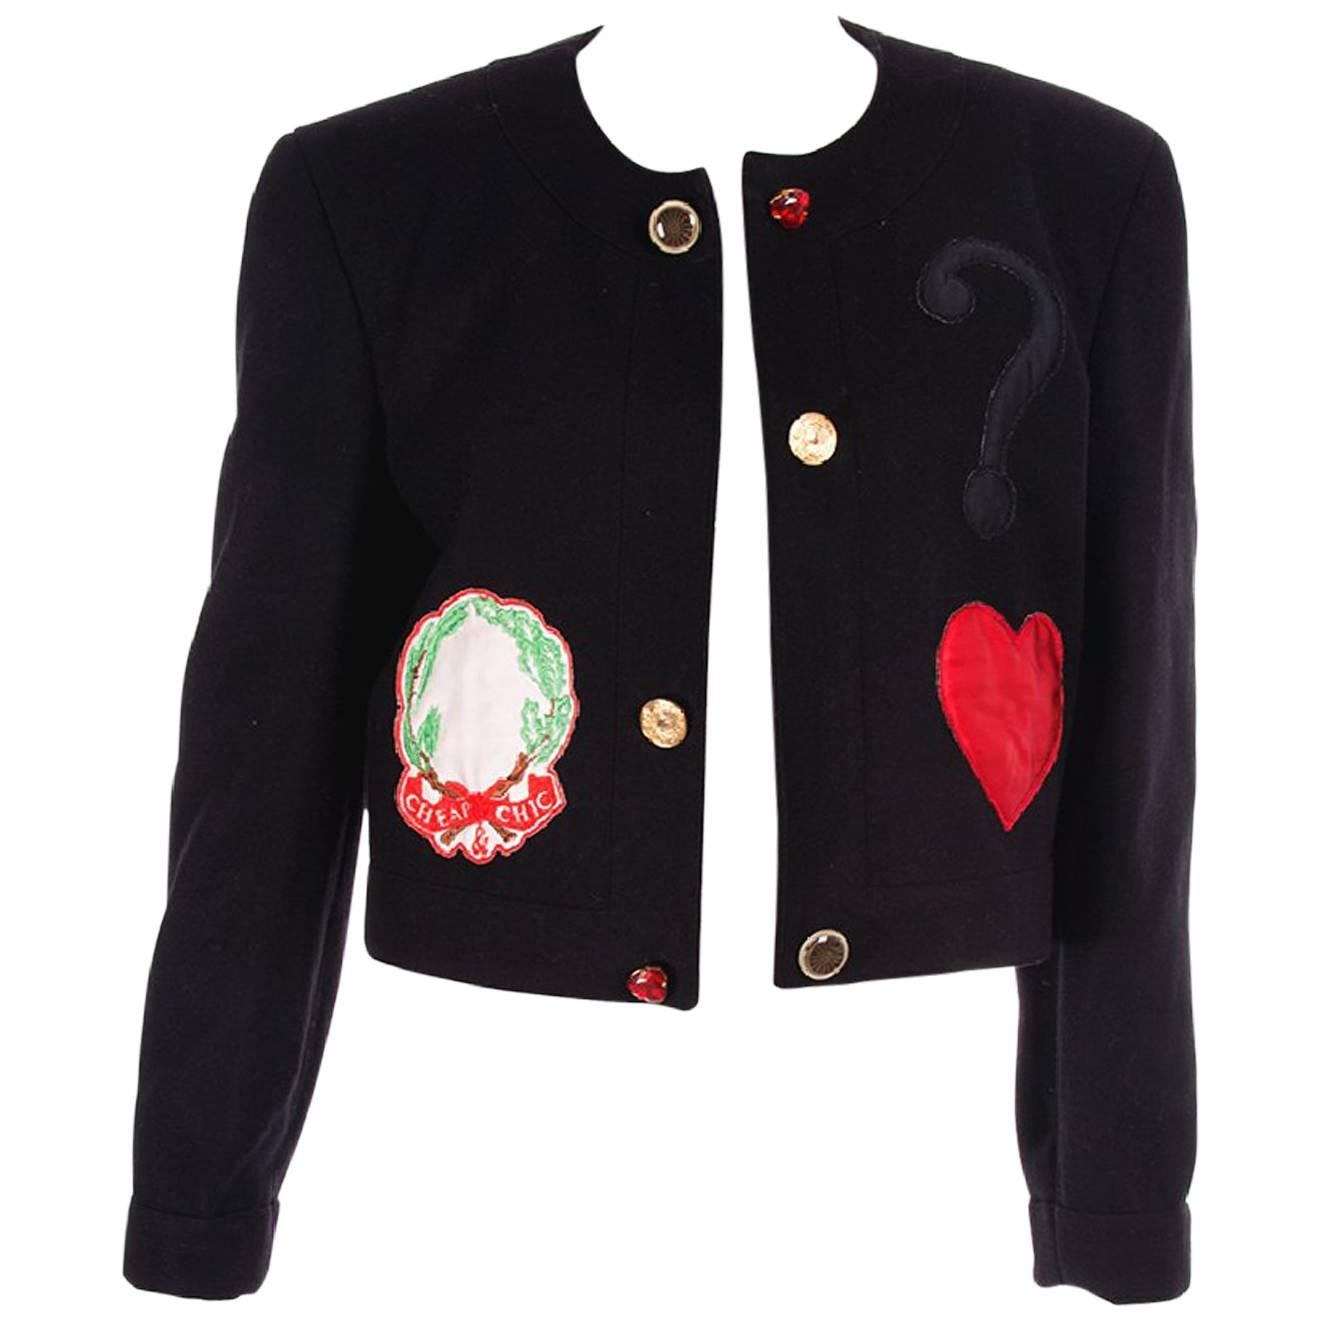 Moschino Cheap and Chic Applique Jacket For Sale